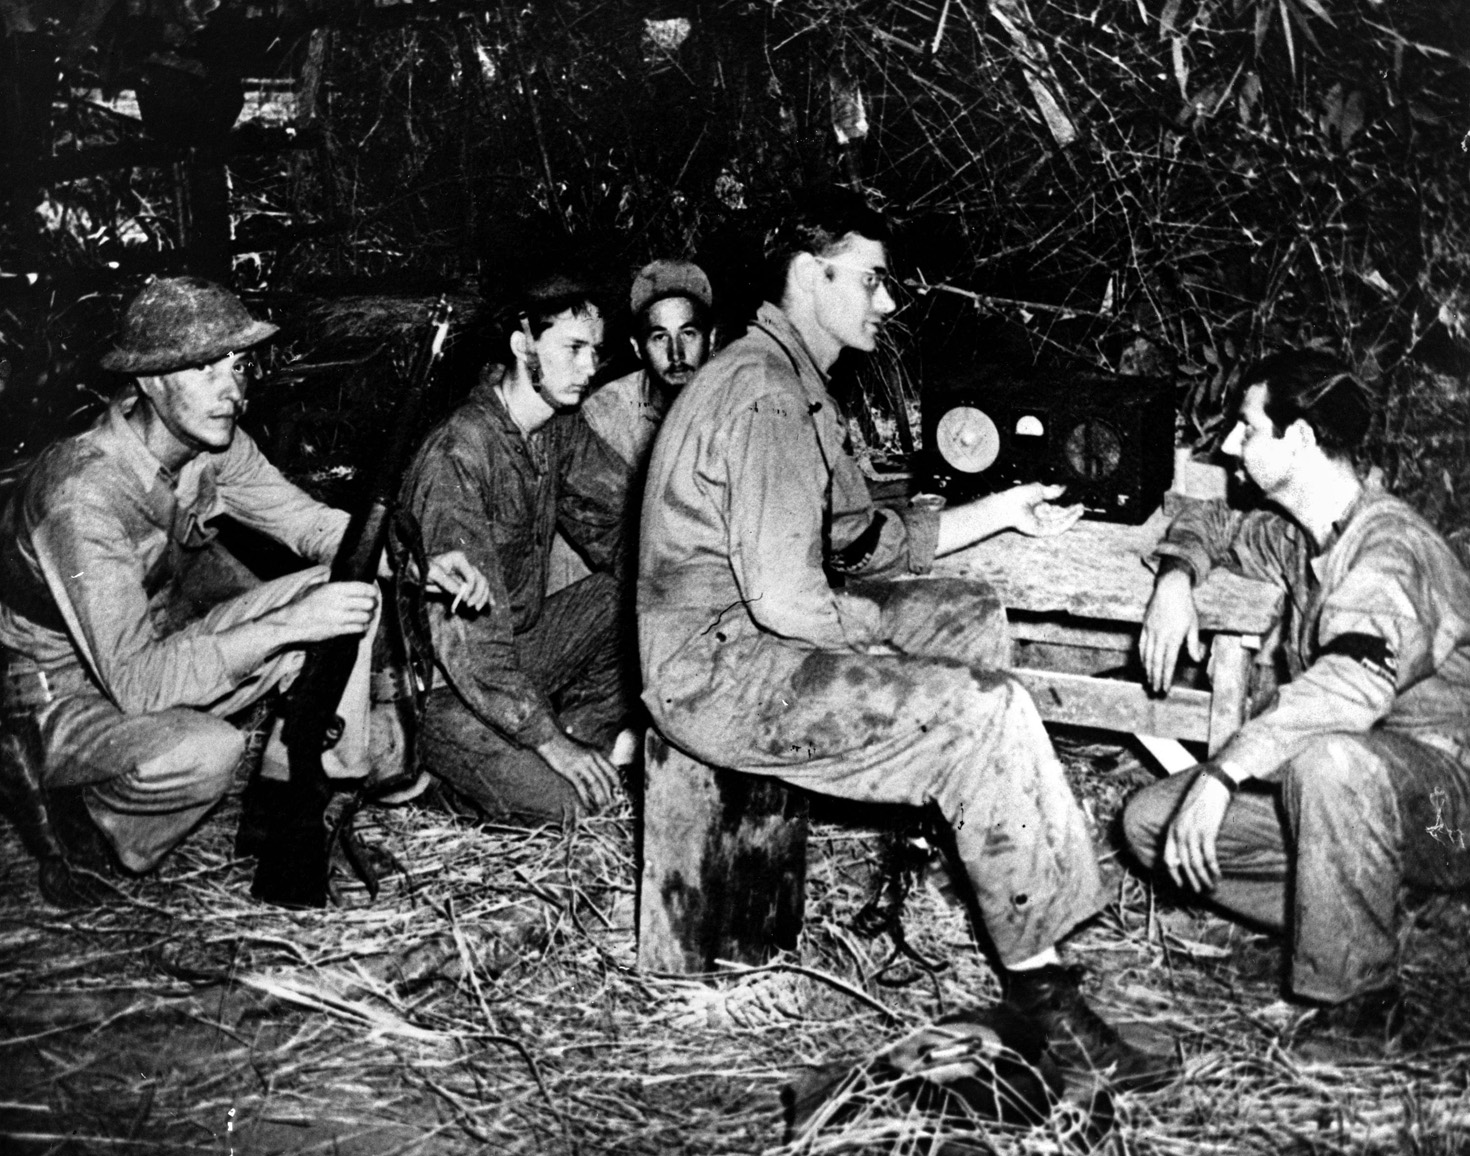 Anxious American soldiers, probably hoping for word on reinforcements, listen to the Voice of Freedom on the radio in the spring of 1942. Reinforcements never materialized.